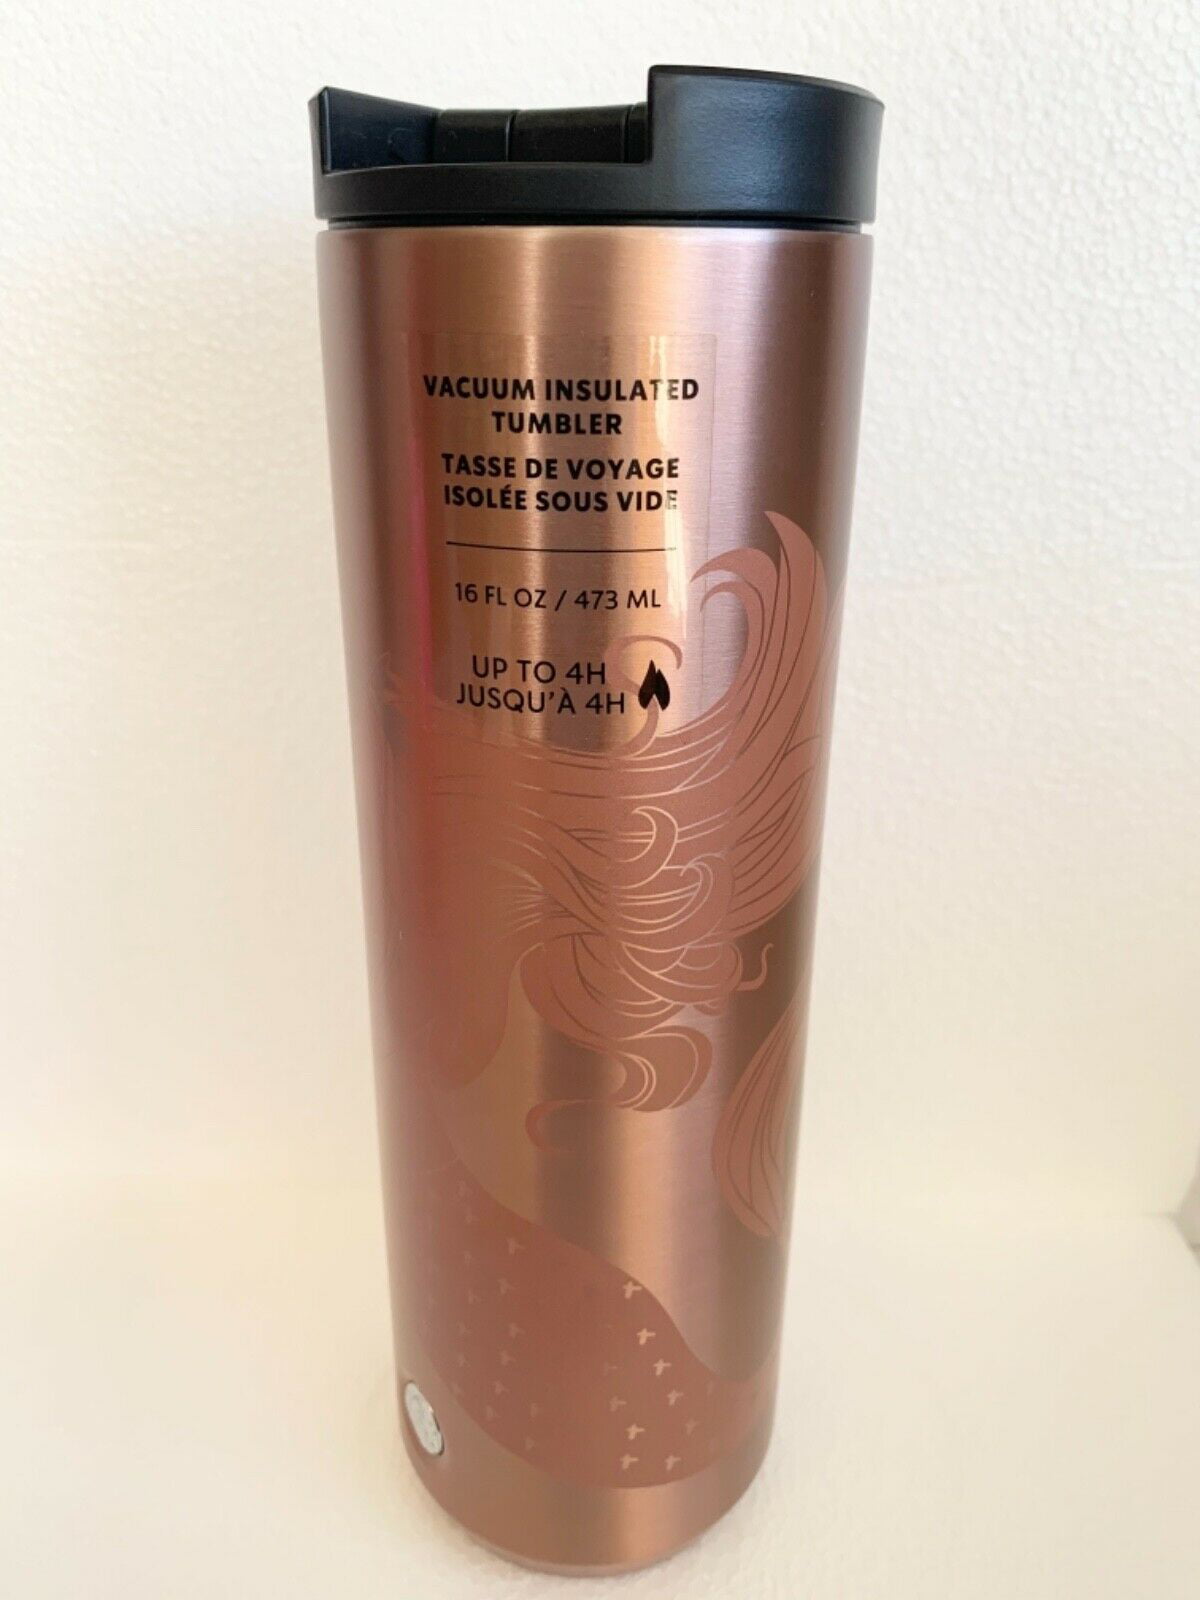 STARBUCKS Copper Gold Stainless Steel Vacuum-Insulated Tumbler 16 oz Hot  Cold Coffee Travel Mug Cup